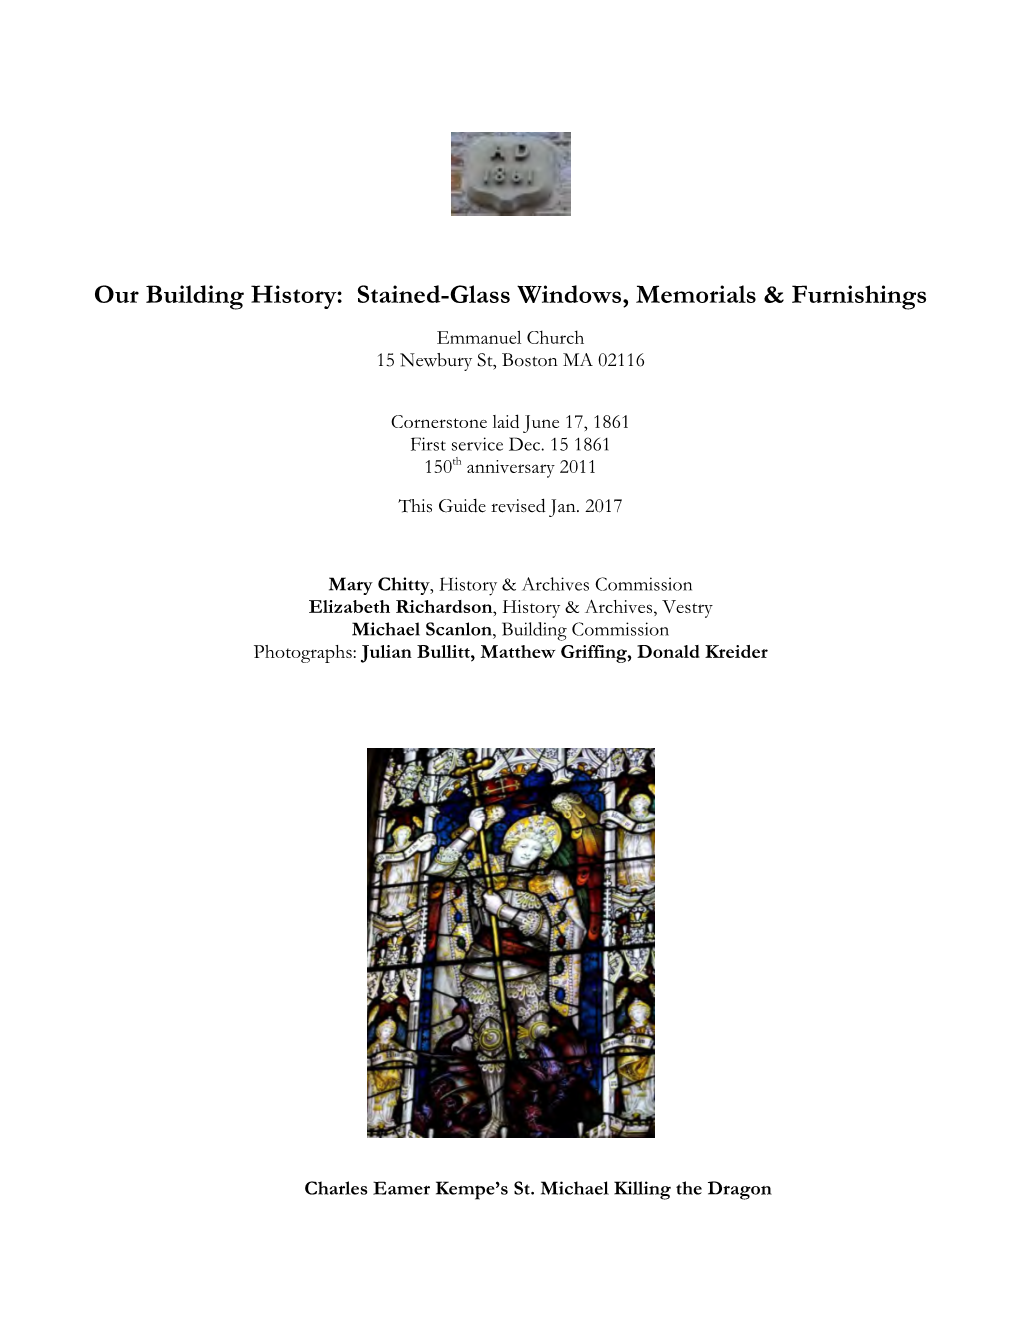 Our Building History: Stained-Glass Windows, Memorials & Furnishings